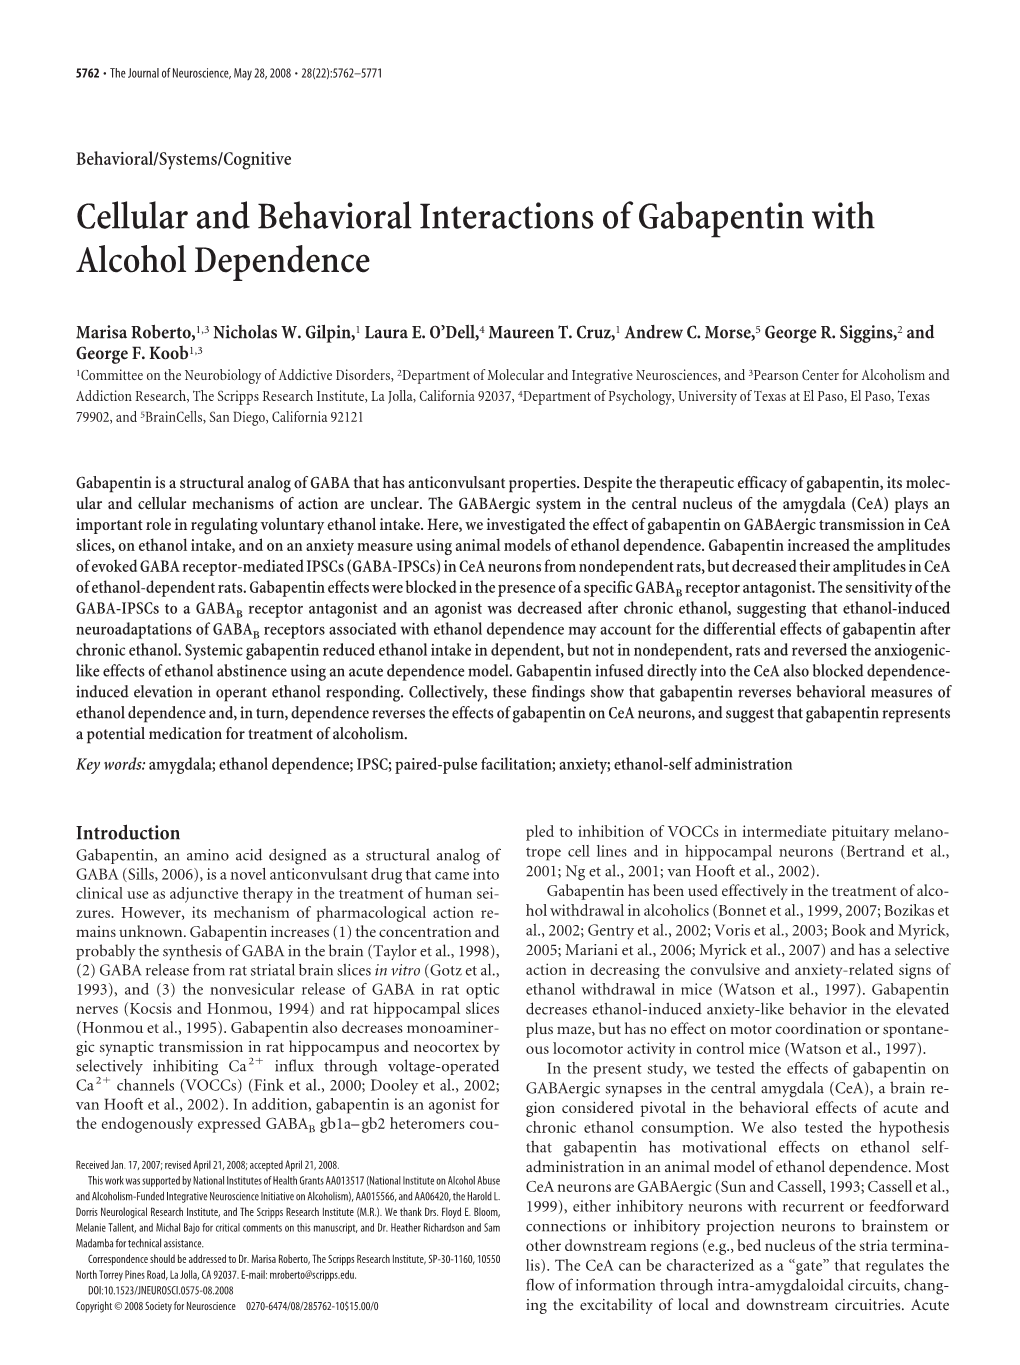 Cellular and Behavioral Interactions of Gabapentin with Alcohol Dependence